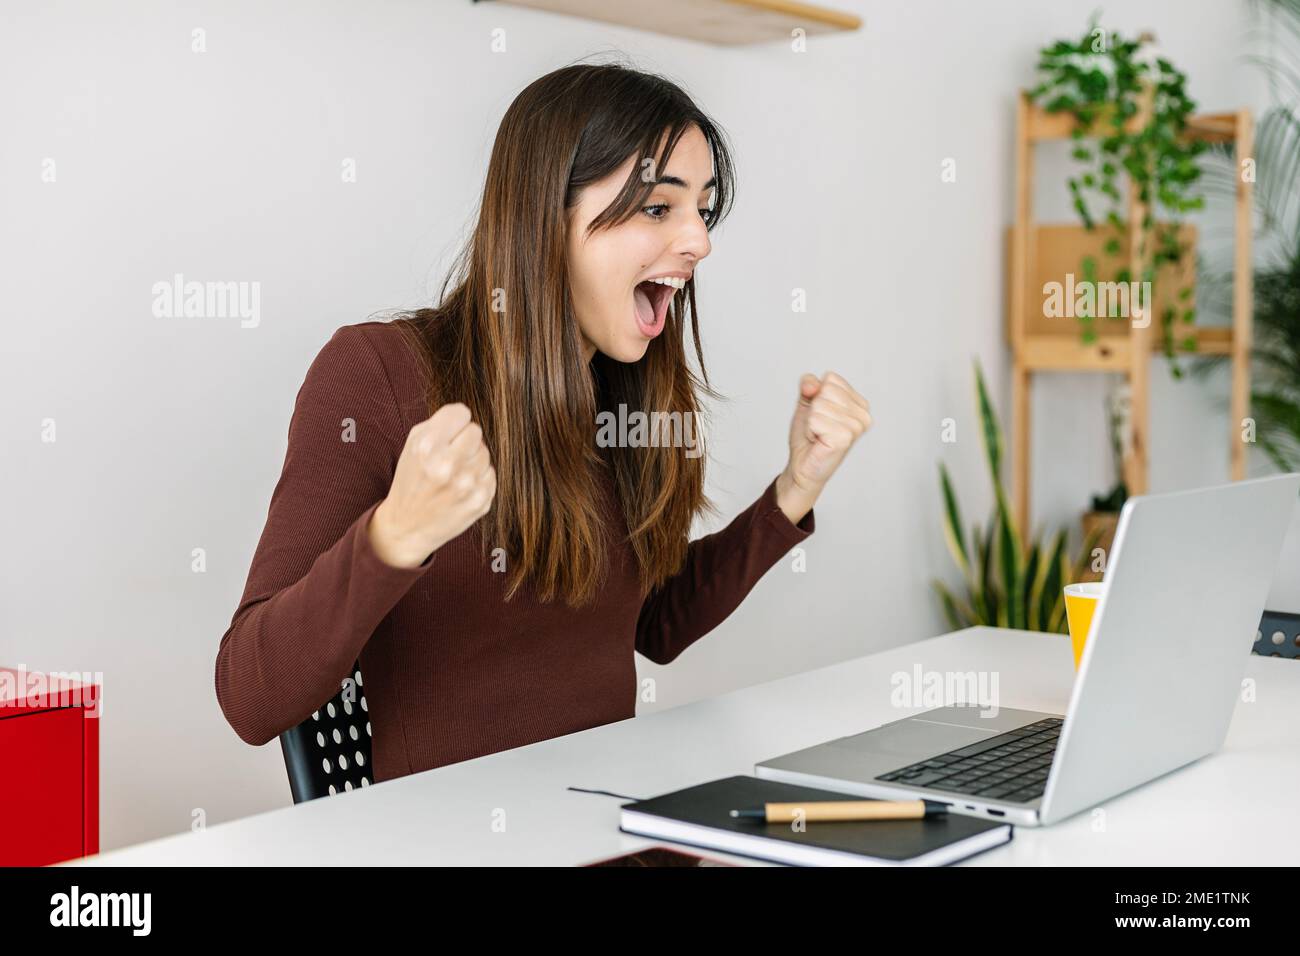 Happy young student woman celebrating good news while using laptop at home Stock Photo